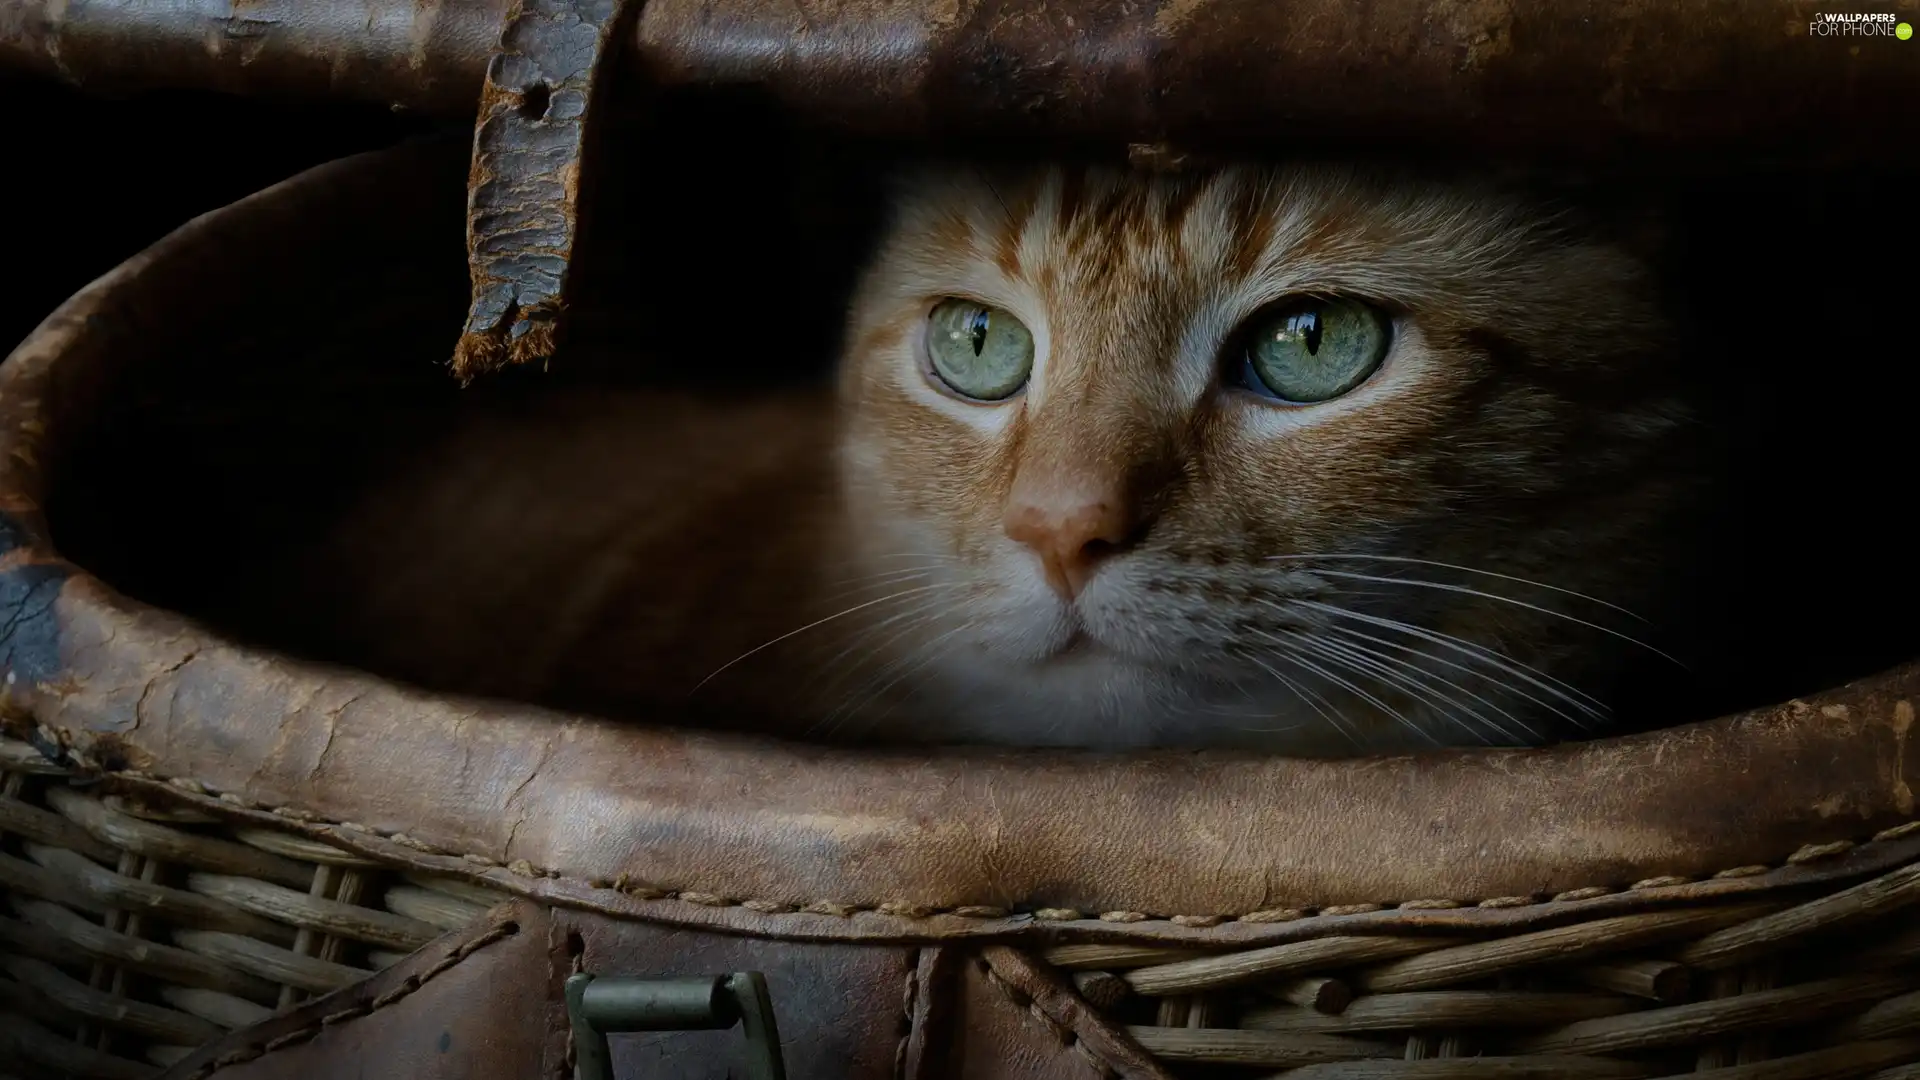 ginger, basket, The look, cat